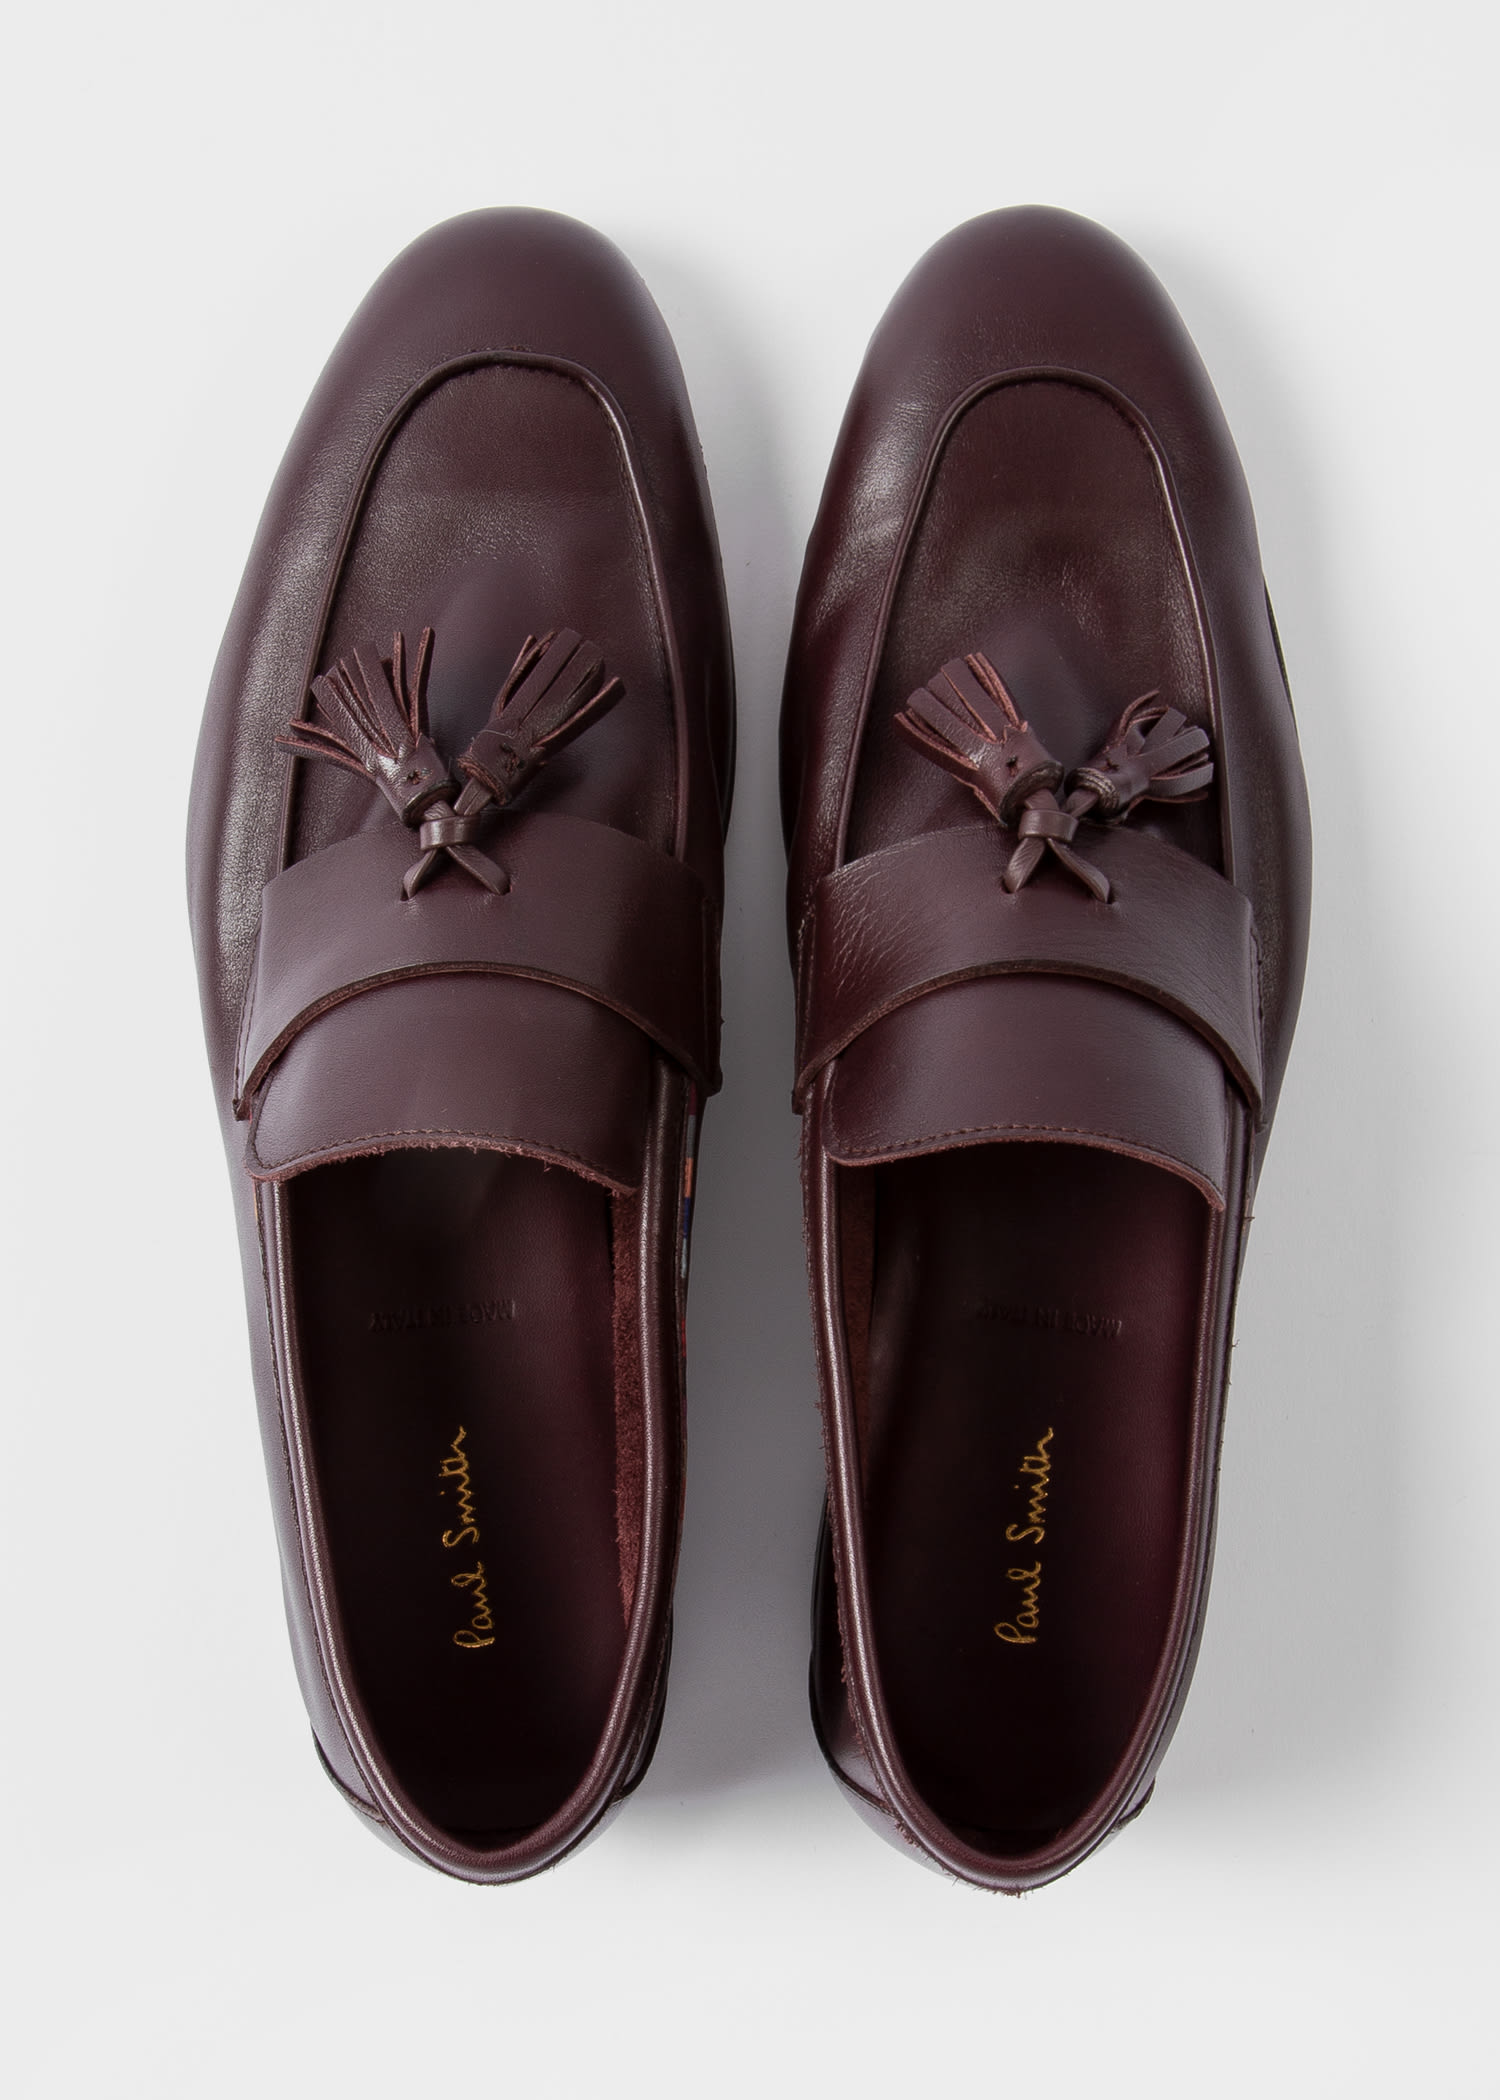 Women's Leather 'Hilton' Loafers - Paul Smith US